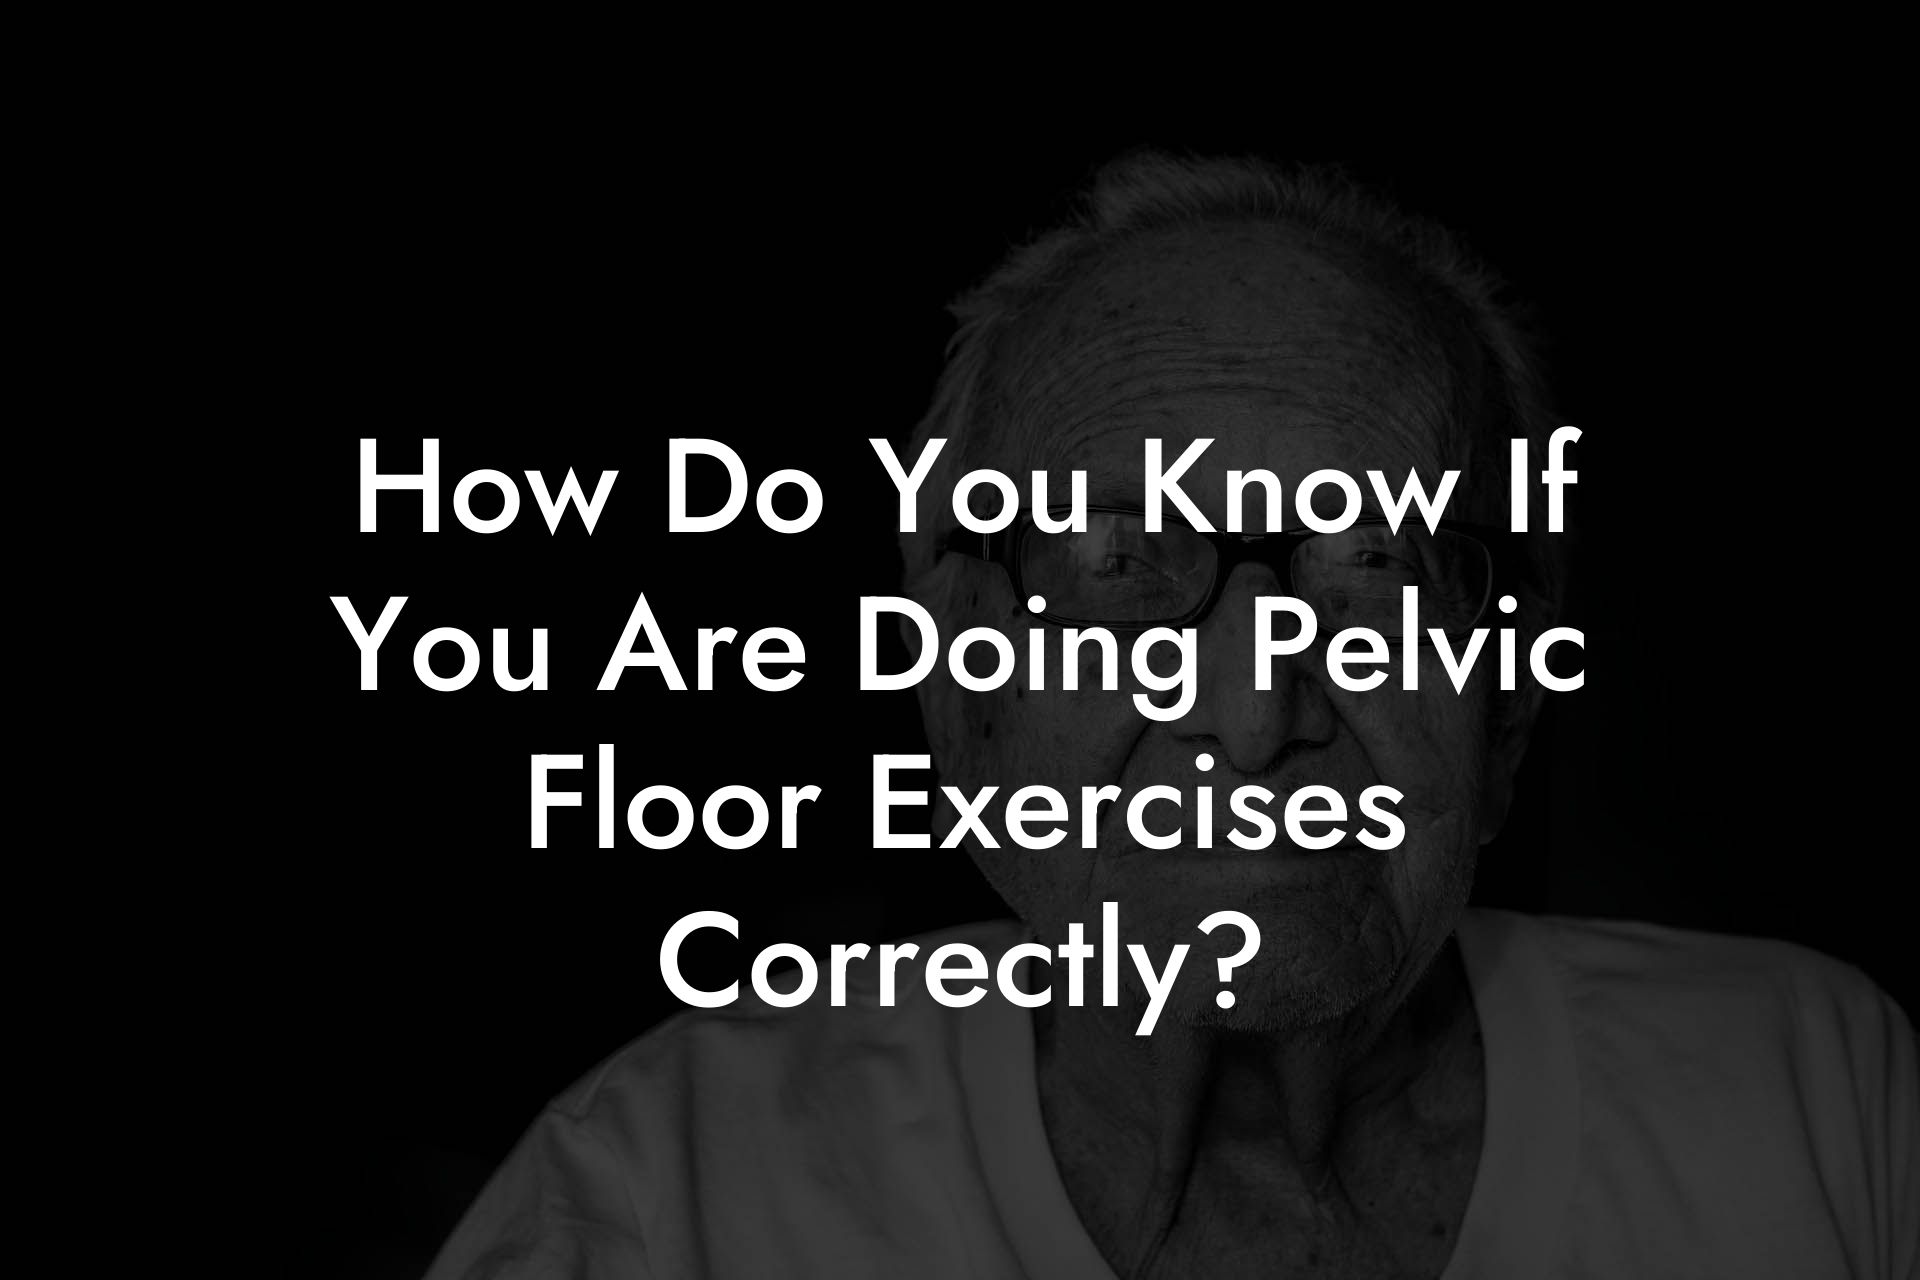 How Do You Know If You Are Doing Pelvic Floor Exercises Correctly?